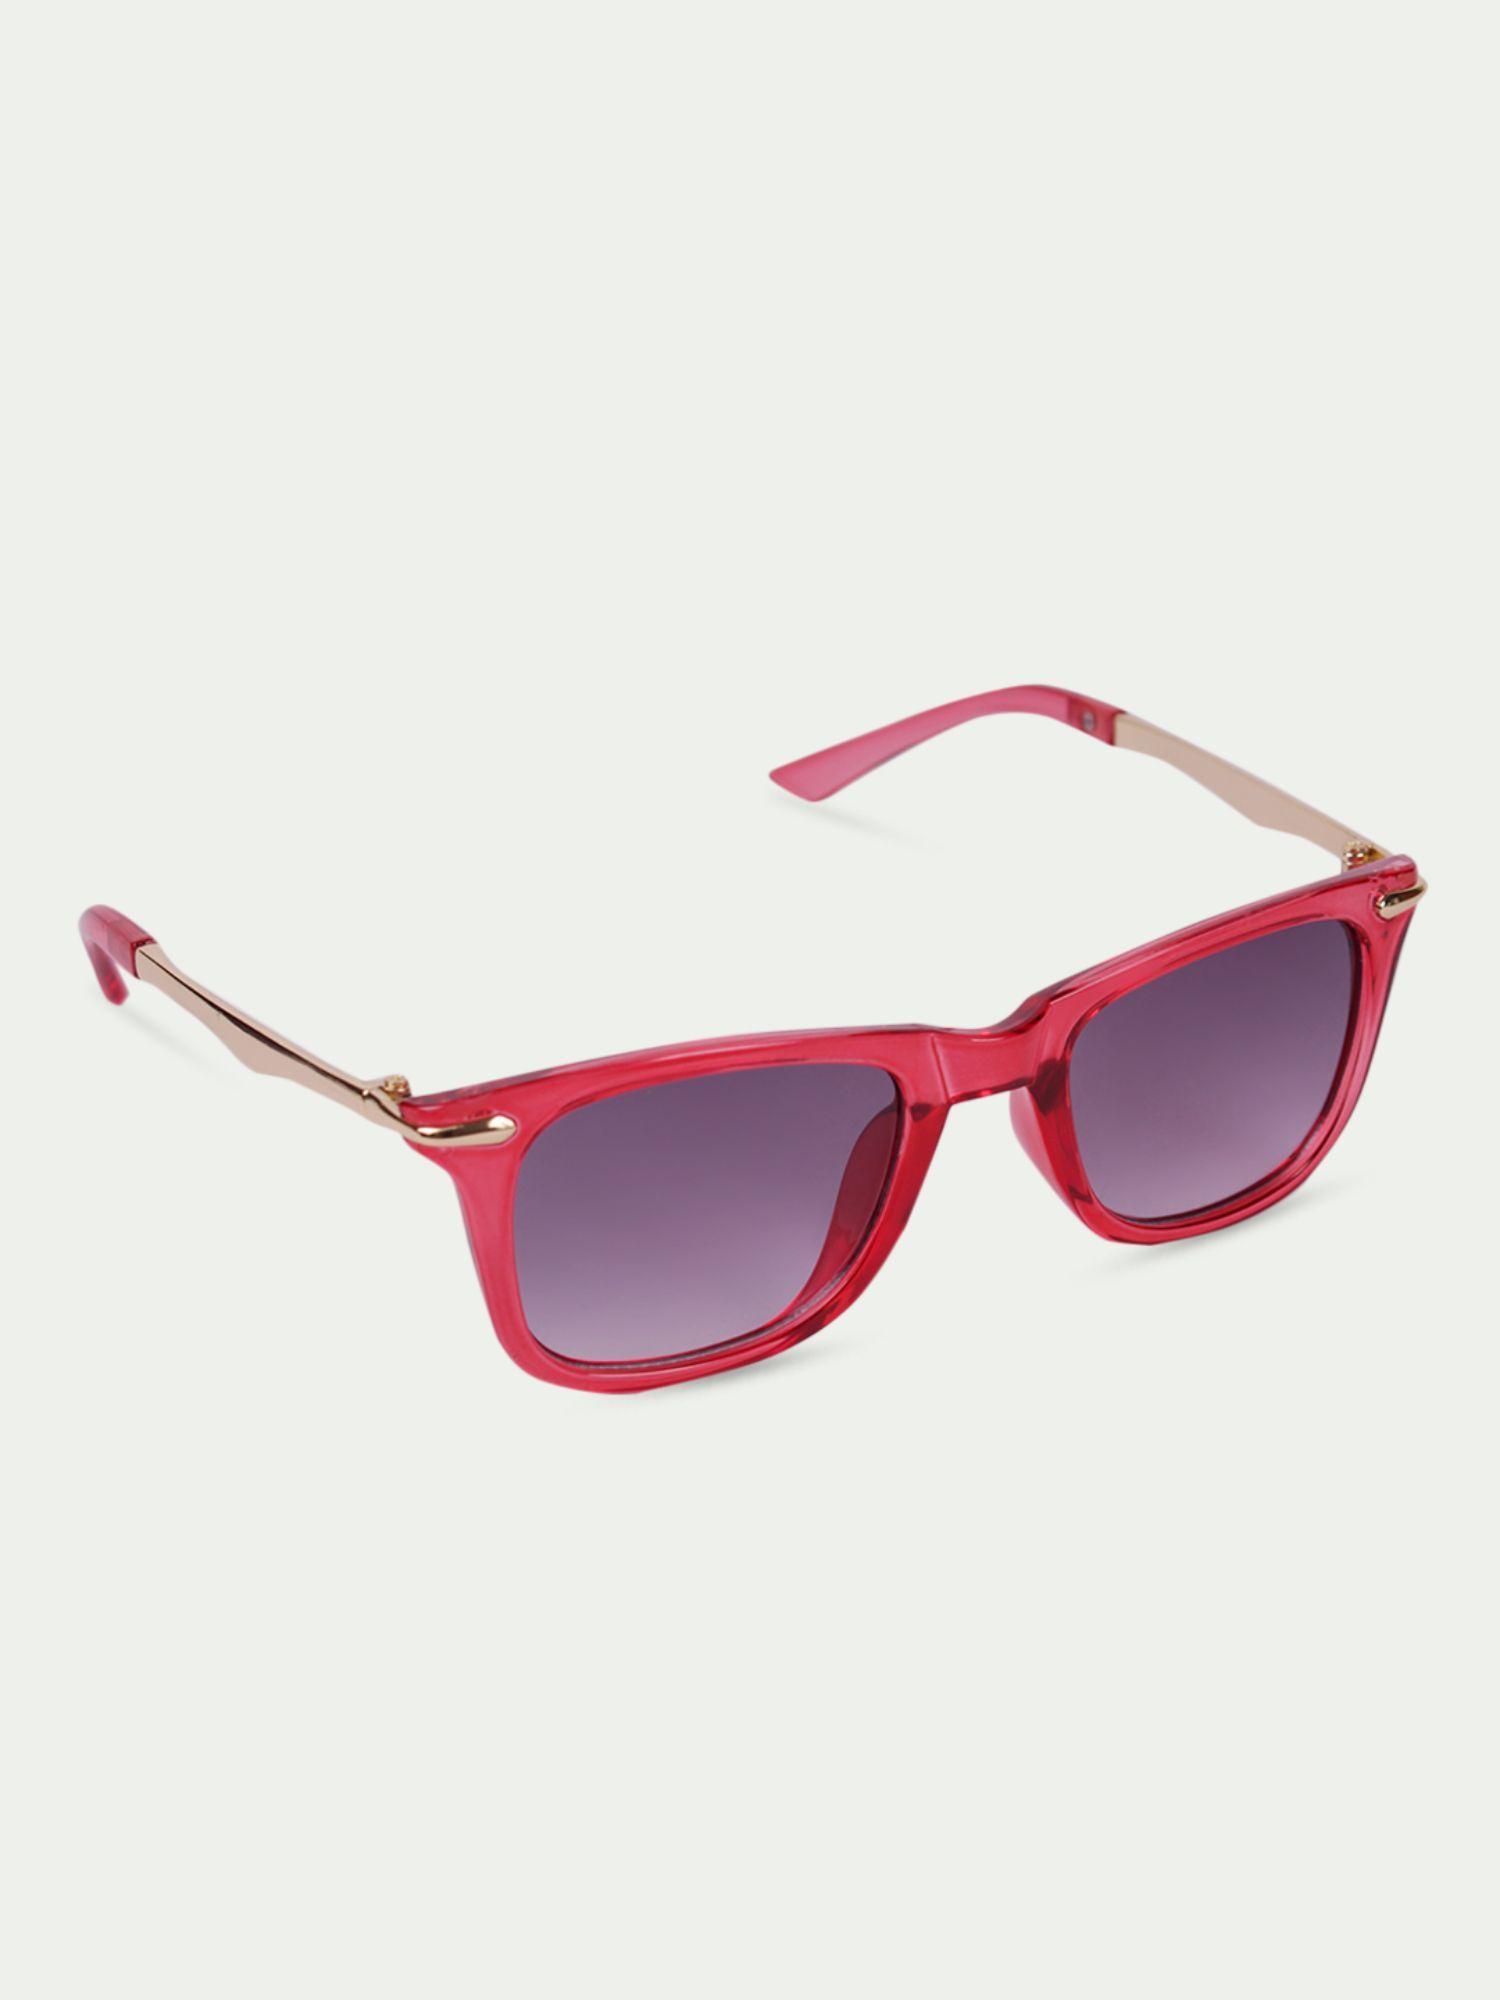 unisex kids purple red square sunglasses with uv protected lens